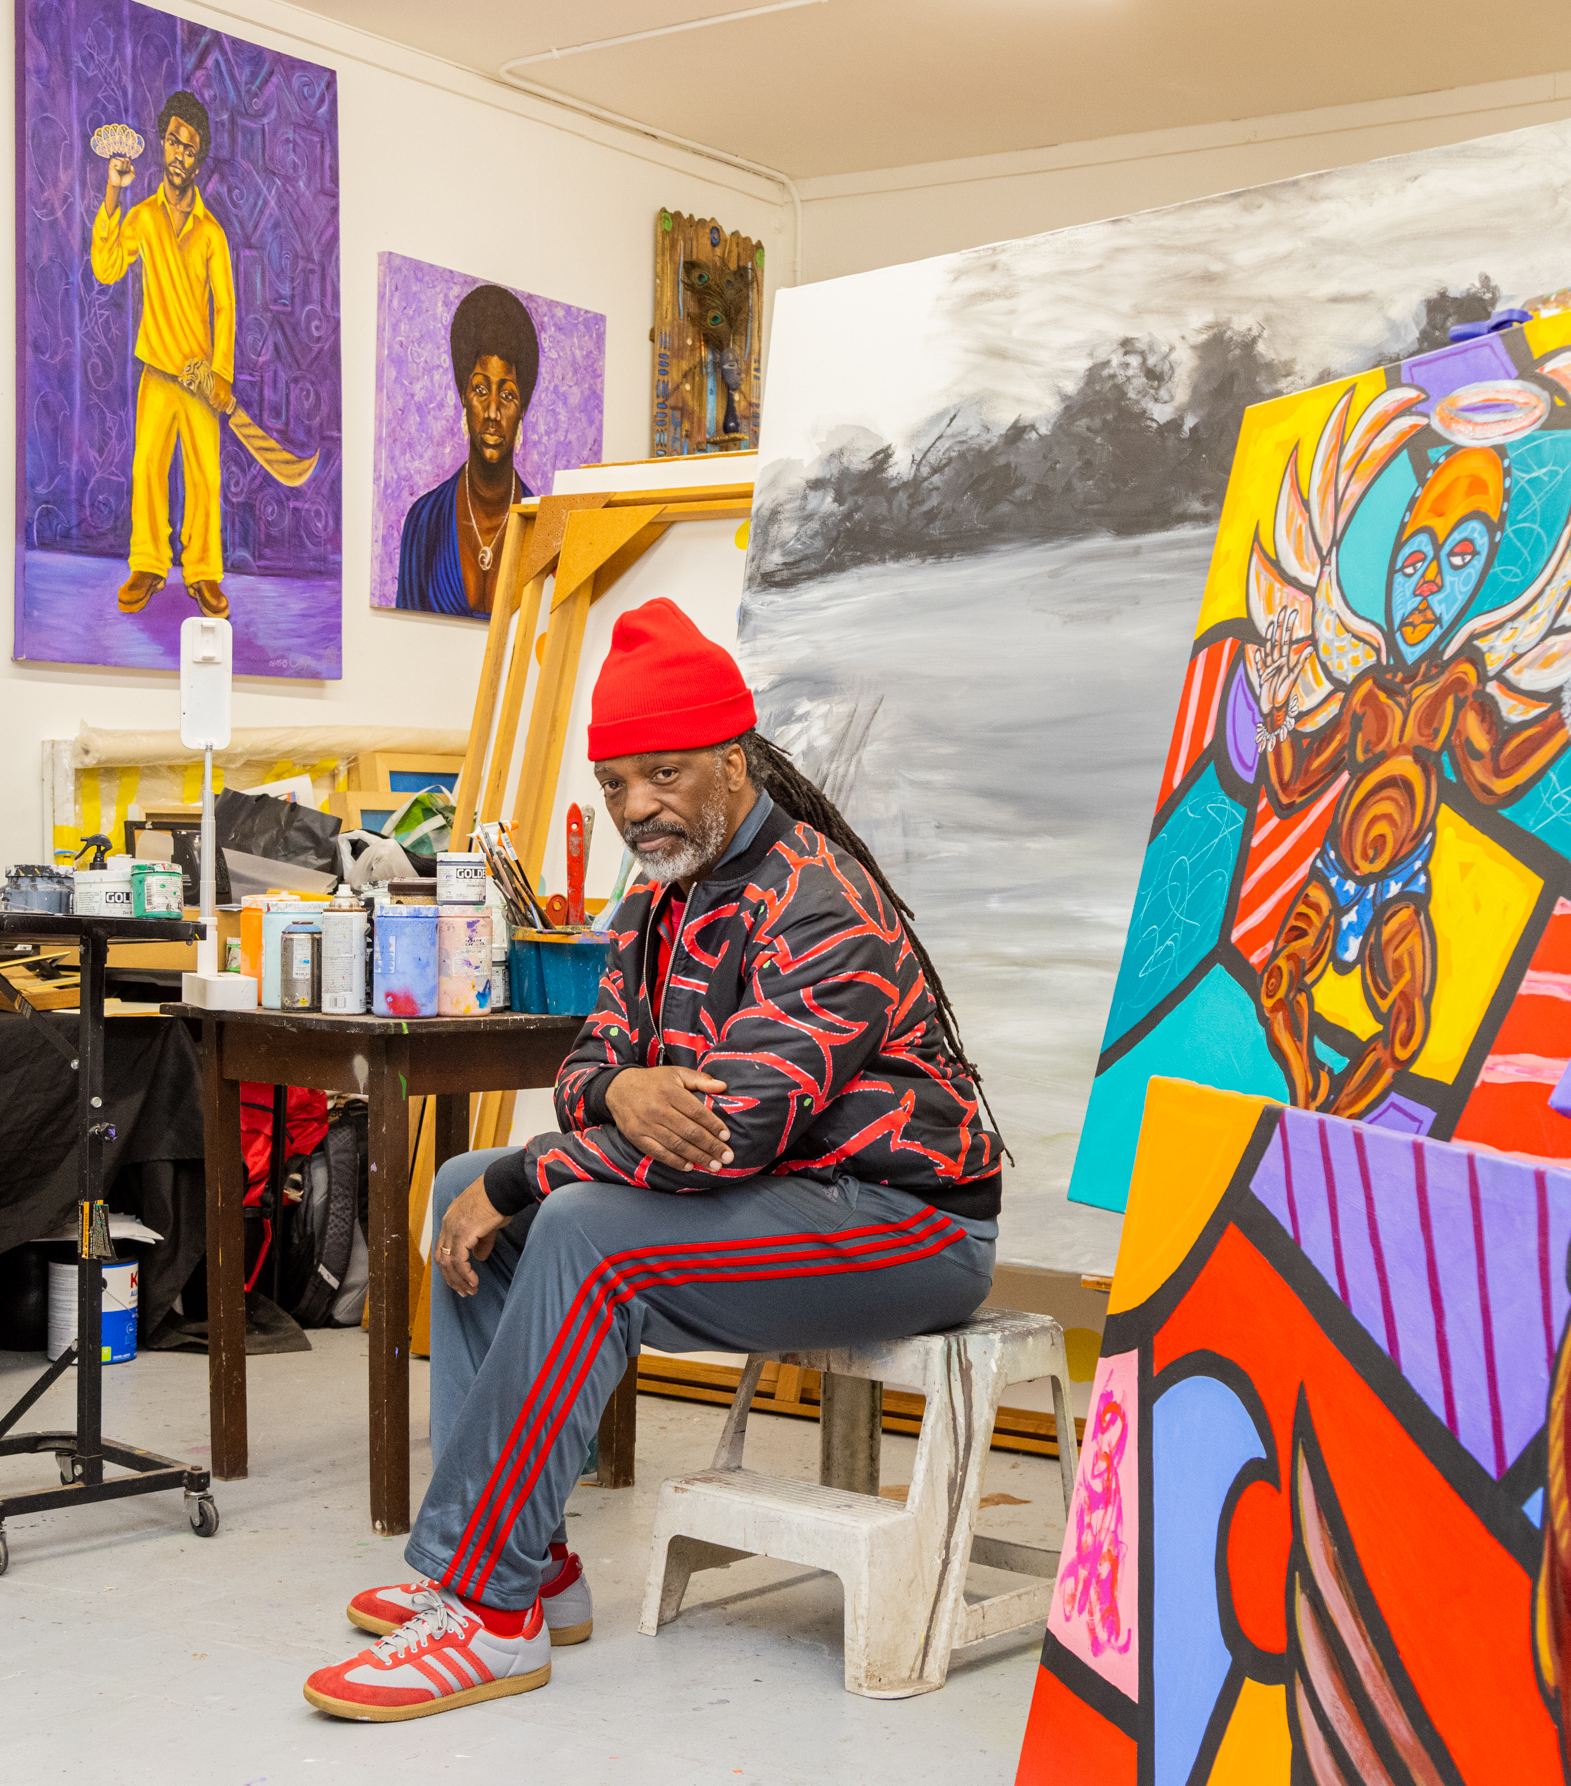 An artist sits among vibrant paintings in a colorful, cluttered studio, exuding a calm, creative aura.